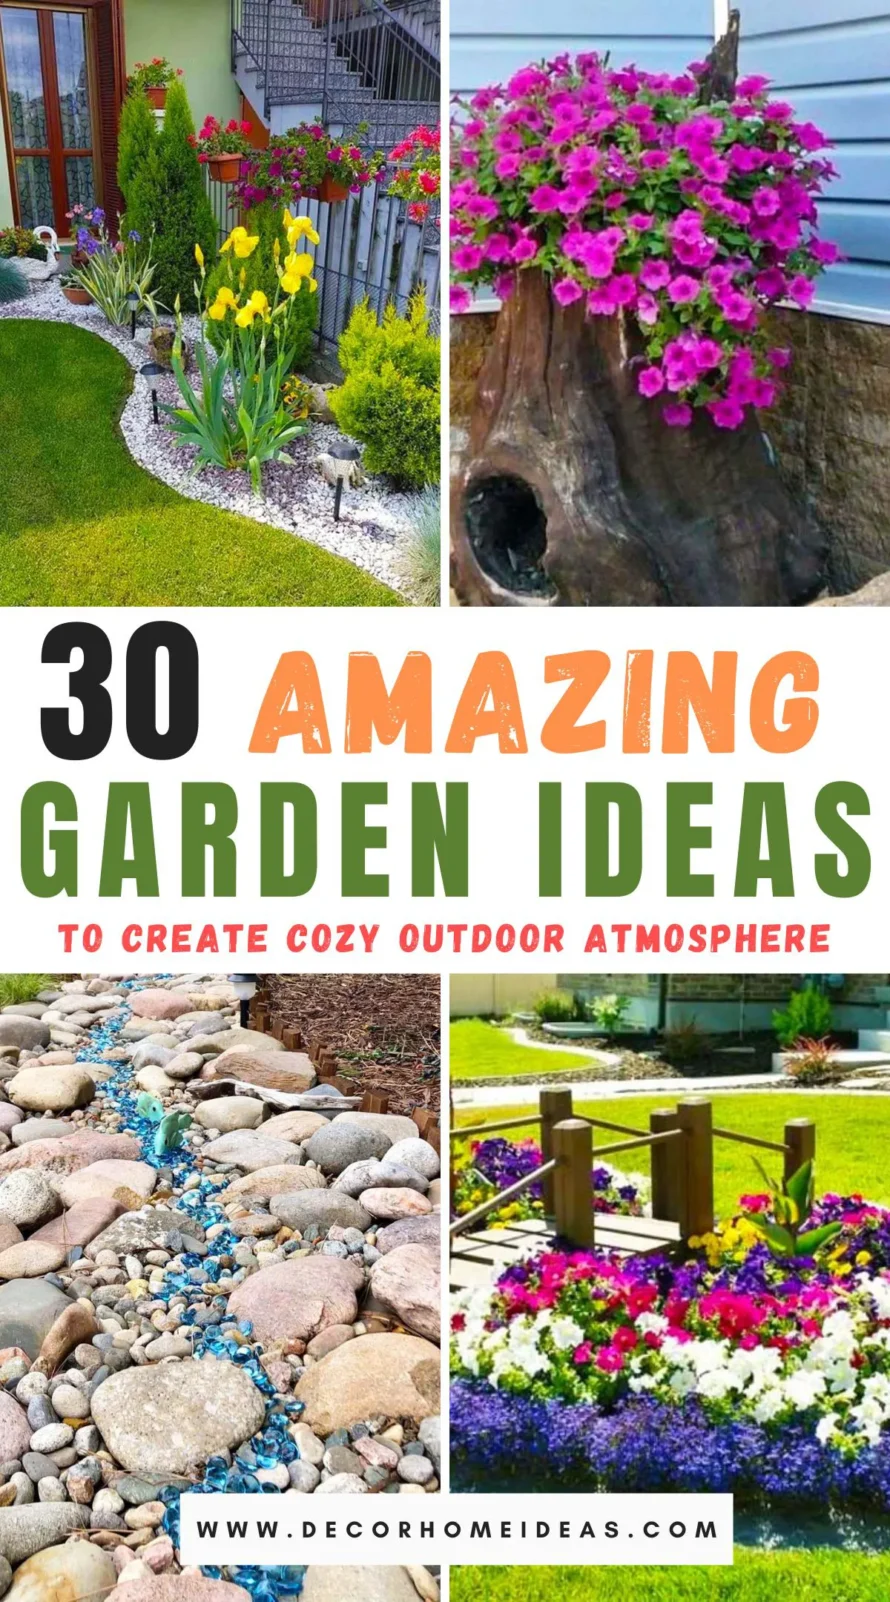 Explore 30 amazing garden designs that blend comfort and style to create a cozy outdoor atmosphere. Whether you're looking to entertain or unwind, these ideas will help you craft a welcoming backyard oasis perfect for any occasion.